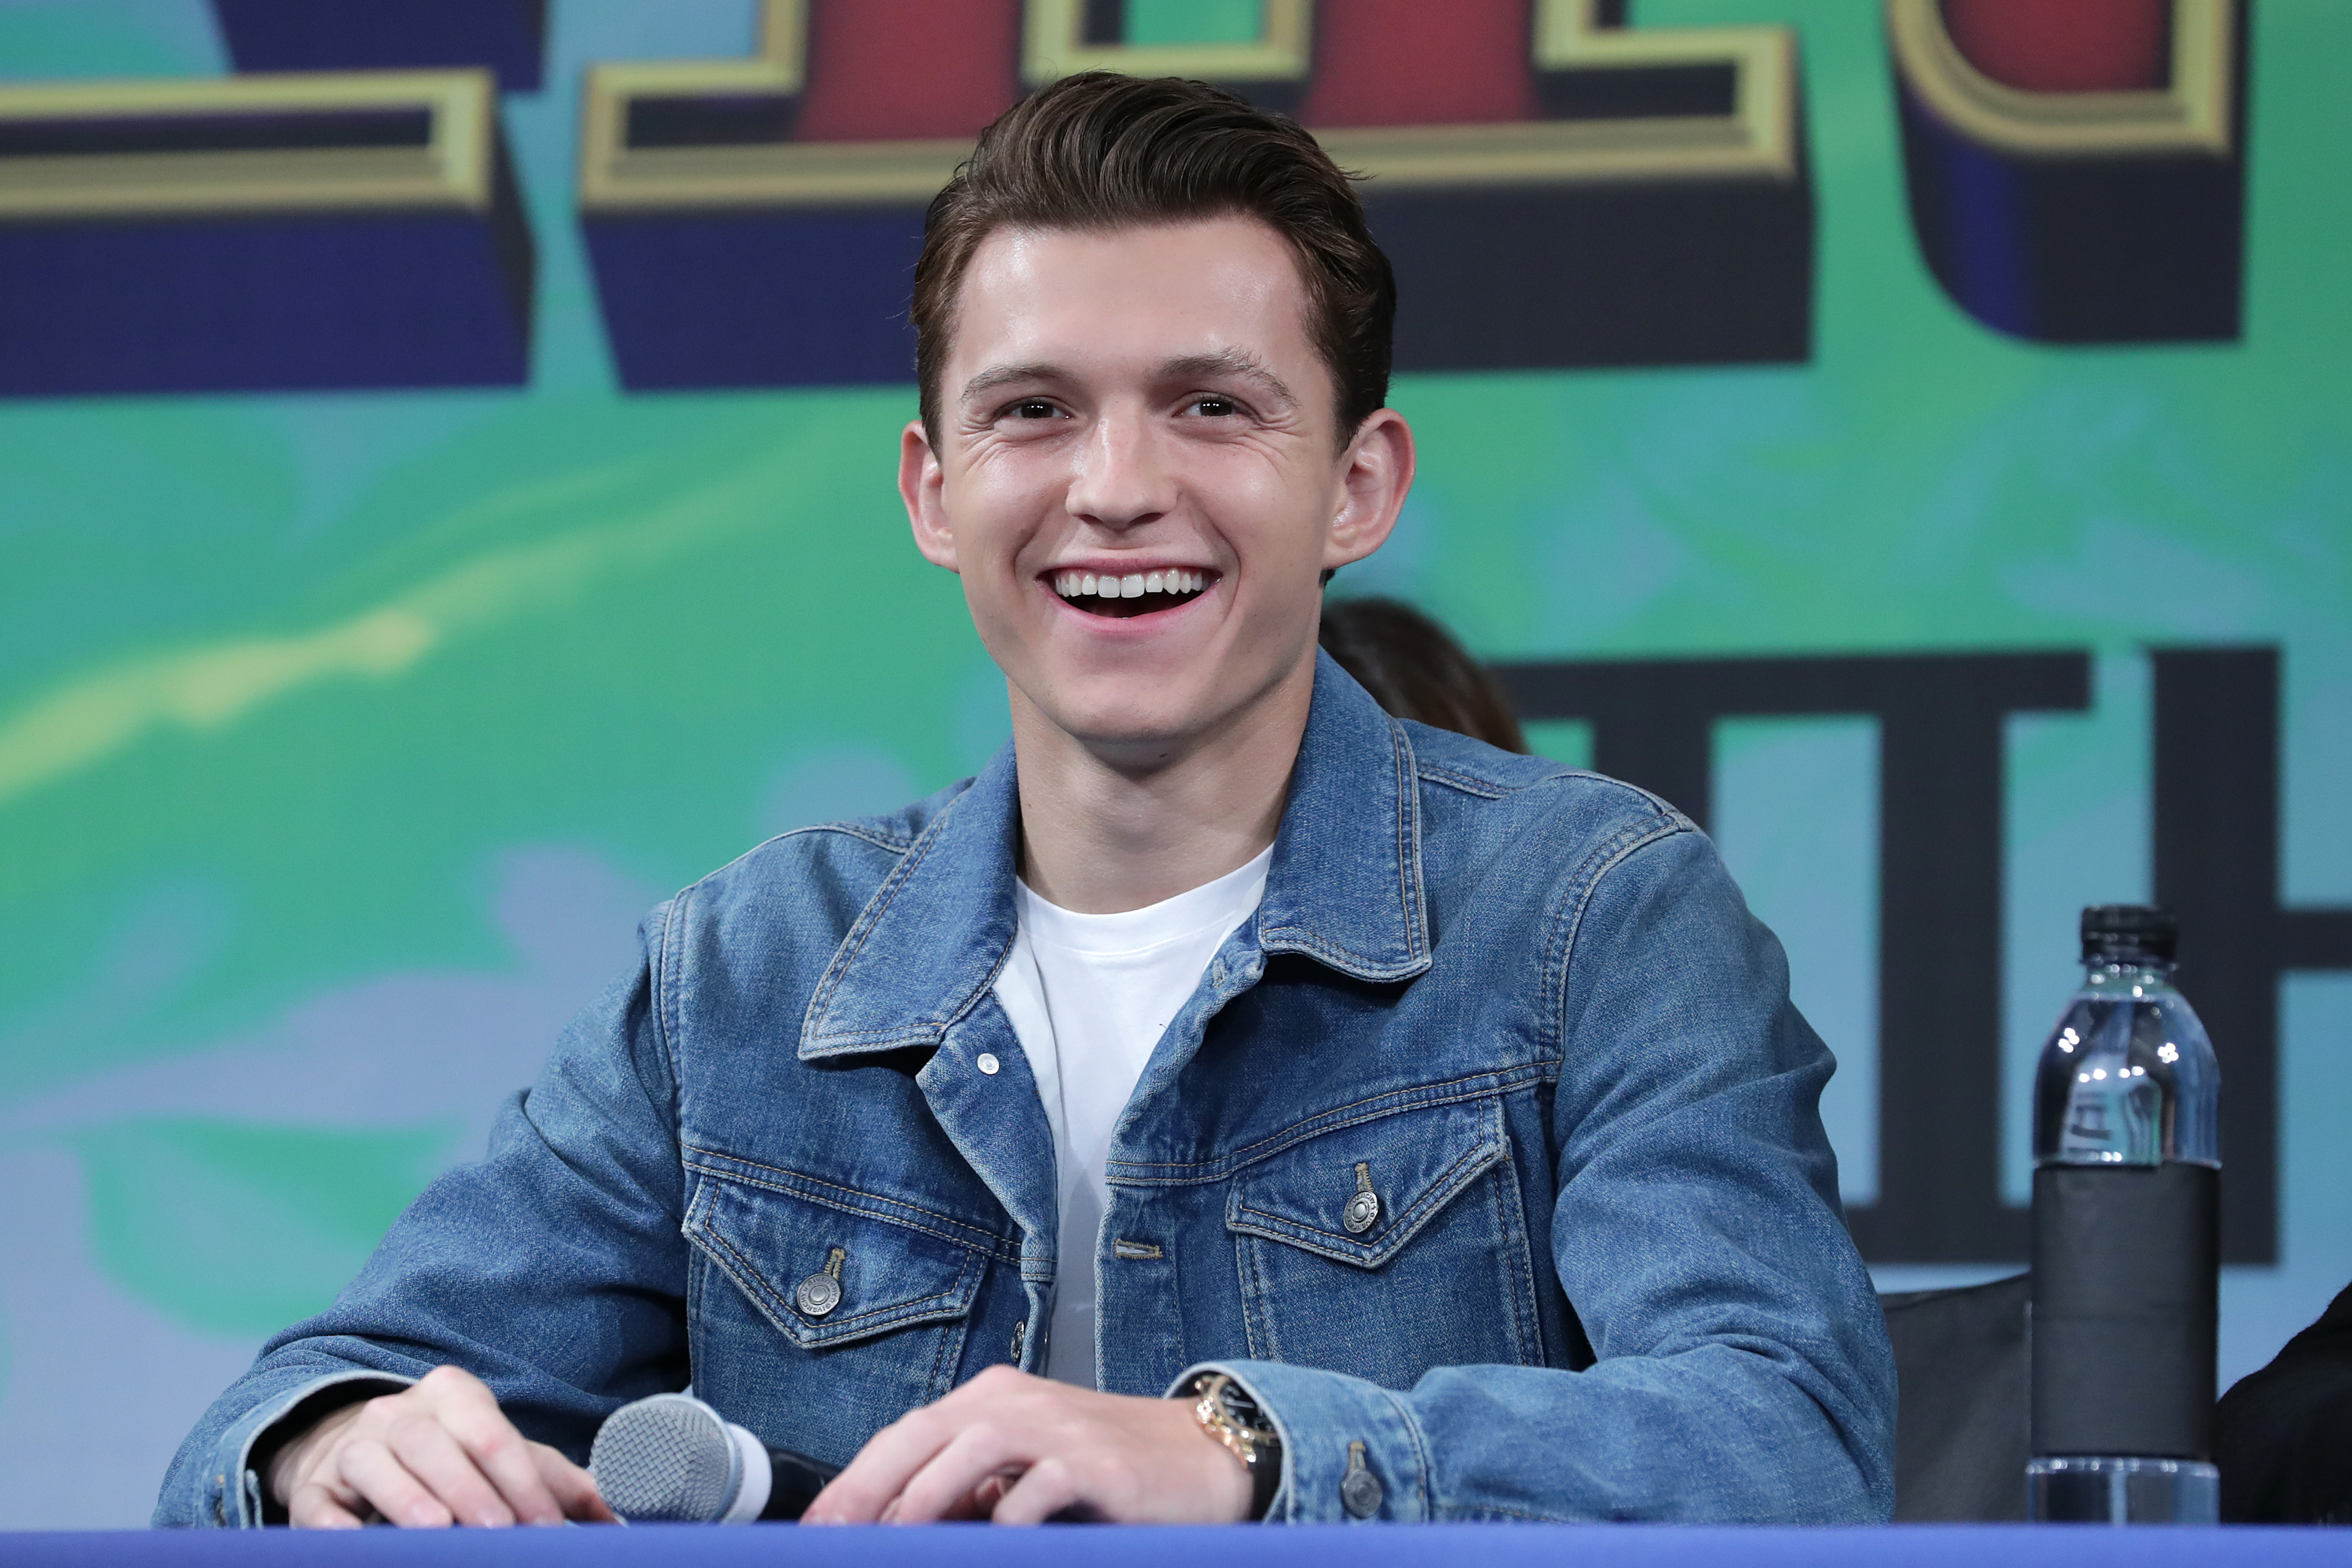 'Spider-Man: No Way Home' star Tom Holland wears a jean jacket over a white shirt.